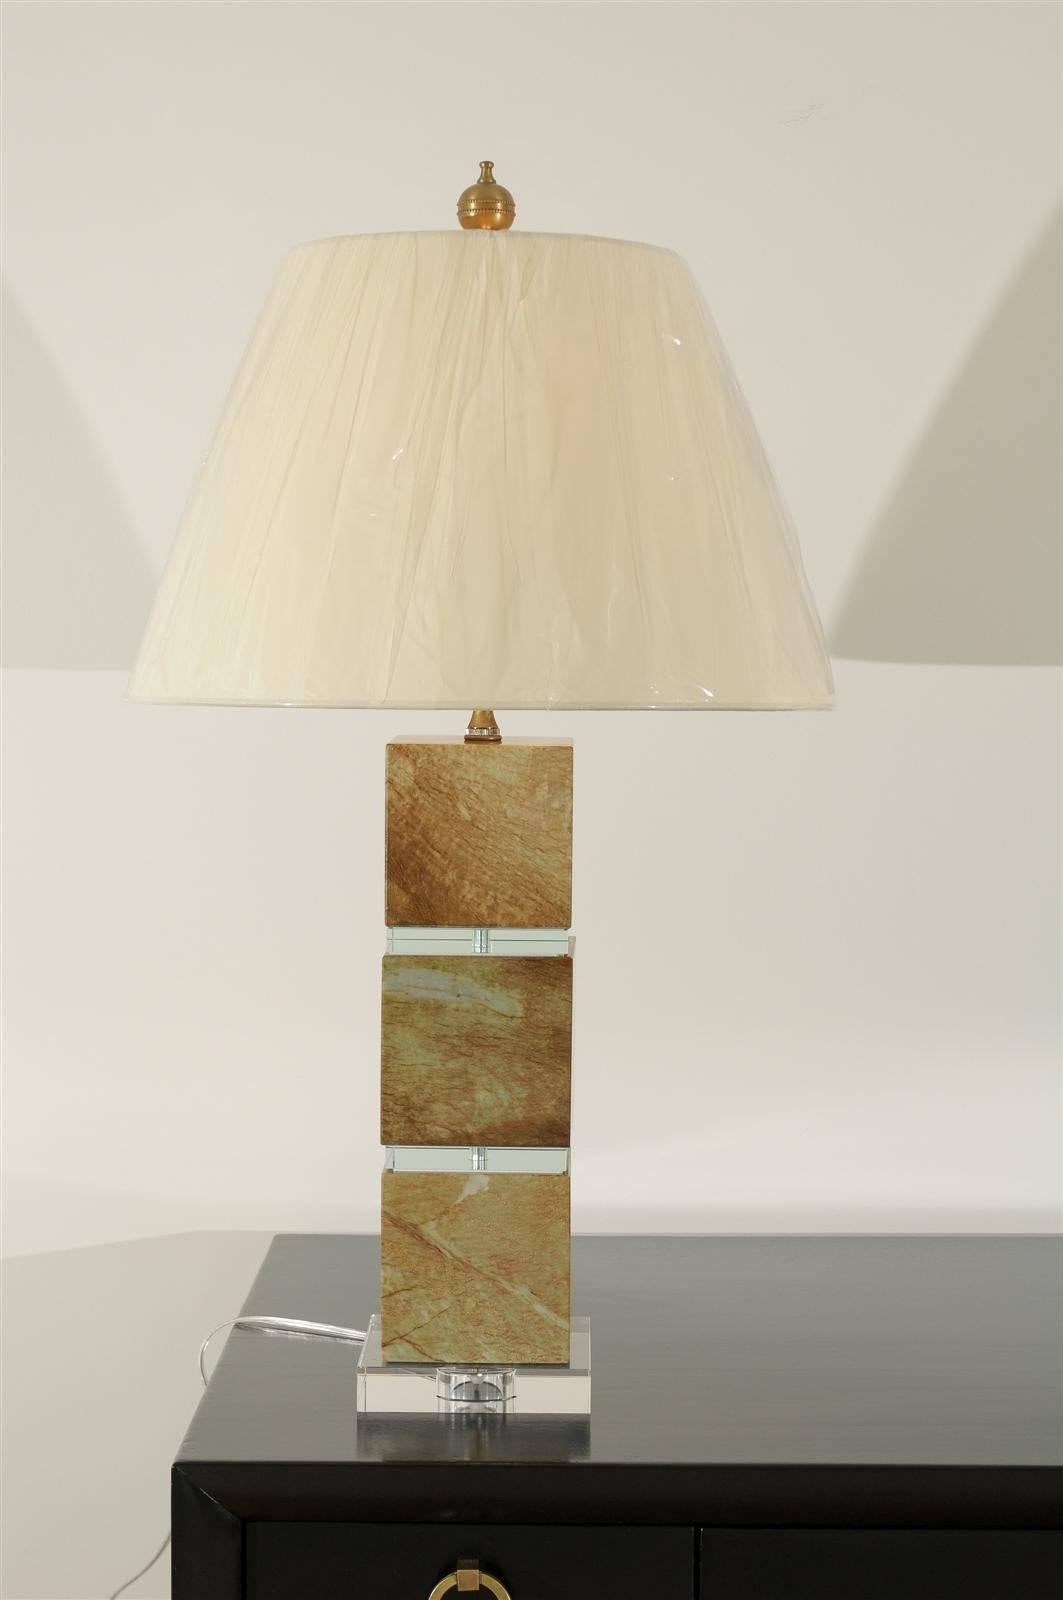 A fabulous pair of vintage lamps in Jade, circa 1980s. Solid sections of stone separated by glass plates. Heavy, beautifully made pieces. Exquisite jewelry! Excellent restored condition. The lamps have been rewired using clear cord, new three-way